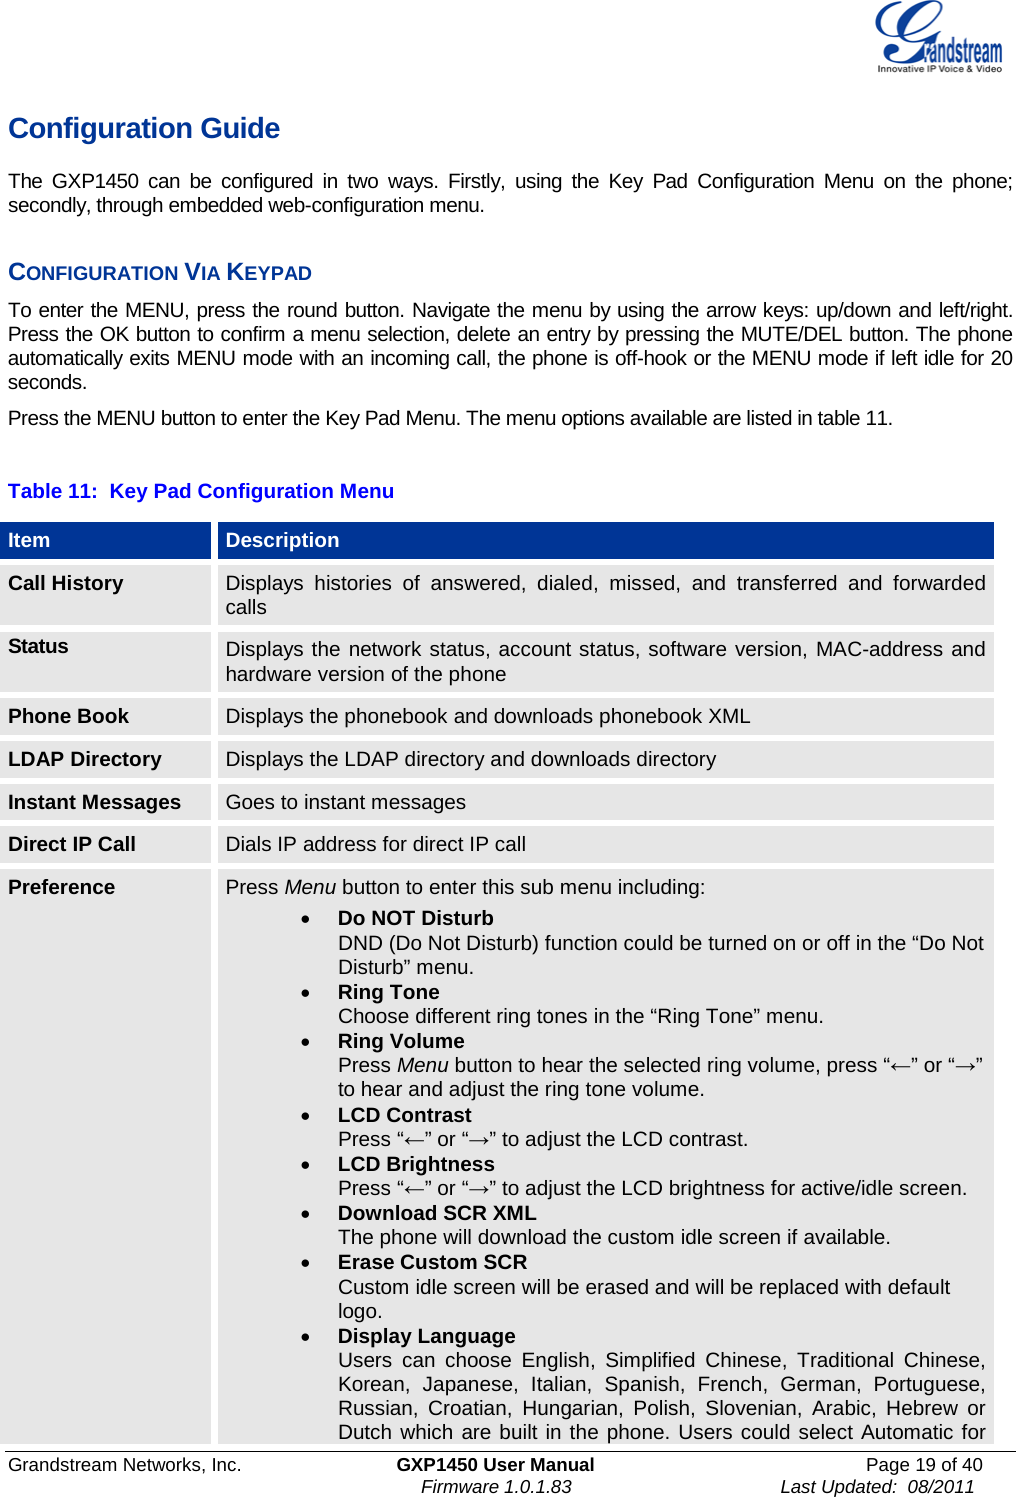  Grandstream Networks, Inc. GXP1450 User Manual Page 19 of 40                                                                          Firmware 1.0.1.83                                        Last Updated:  08/2011  Configuration Guide The  GXP1450 can be configured in two ways. Firstly, using the Key Pad Configuration Menu on the phone; secondly, through embedded web-configuration menu.  CONFIGURATION VIA KEYPAD To enter the MENU, press the round button. Navigate the menu by using the arrow keys: up/down and left/right. Press the OK button to confirm a menu selection, delete an entry by pressing the MUTE/DEL button. The phone automatically exits MENU mode with an incoming call, the phone is off-hook or the MENU mode if left idle for 20 seconds. Press the MENU button to enter the Key Pad Menu. The menu options available are listed in table 11.  Table 11:  Key Pad Configuration Menu Item Description Call History Displays histories of answered, dialed,  missed,  and transferred and forwarded calls Status Displays the network status, account status, software version, MAC-address and hardware version of the phone Phone Book Displays the phonebook and downloads phonebook XML LDAP Directory Displays the LDAP directory and downloads directory Instant Messages Goes to instant messages Direct IP Call Dials IP address for direct IP call Preference Press Menu button to enter this sub menu including: • Do NOT Disturb DND (Do Not Disturb) function could be turned on or off in the “Do Not Disturb” menu. • Ring Tone Choose different ring tones in the “Ring Tone” menu. • Ring Volume Press Menu button to hear the selected ring volume, press “←” or “→” to hear and adjust the ring tone volume. • LCD Contrast Press “←” or “→” to adjust the LCD contrast. • LCD Brightness Press “←” or “→” to adjust the LCD brightness for active/idle screen. • Download SCR XML The phone will download the custom idle screen if available. • Erase Custom SCR Custom idle screen will be erased and will be replaced with default logo. • Display Language Users can choose English, Simplified  Chinese, Traditional Chinese, Korean, Japanese, Italian, Spanish, French, German, Portuguese, Russian, Croatian, Hungarian, Polish, Slovenian, Arabic, Hebrew or Dutch which are built in the phone. Users could select Automatic for 